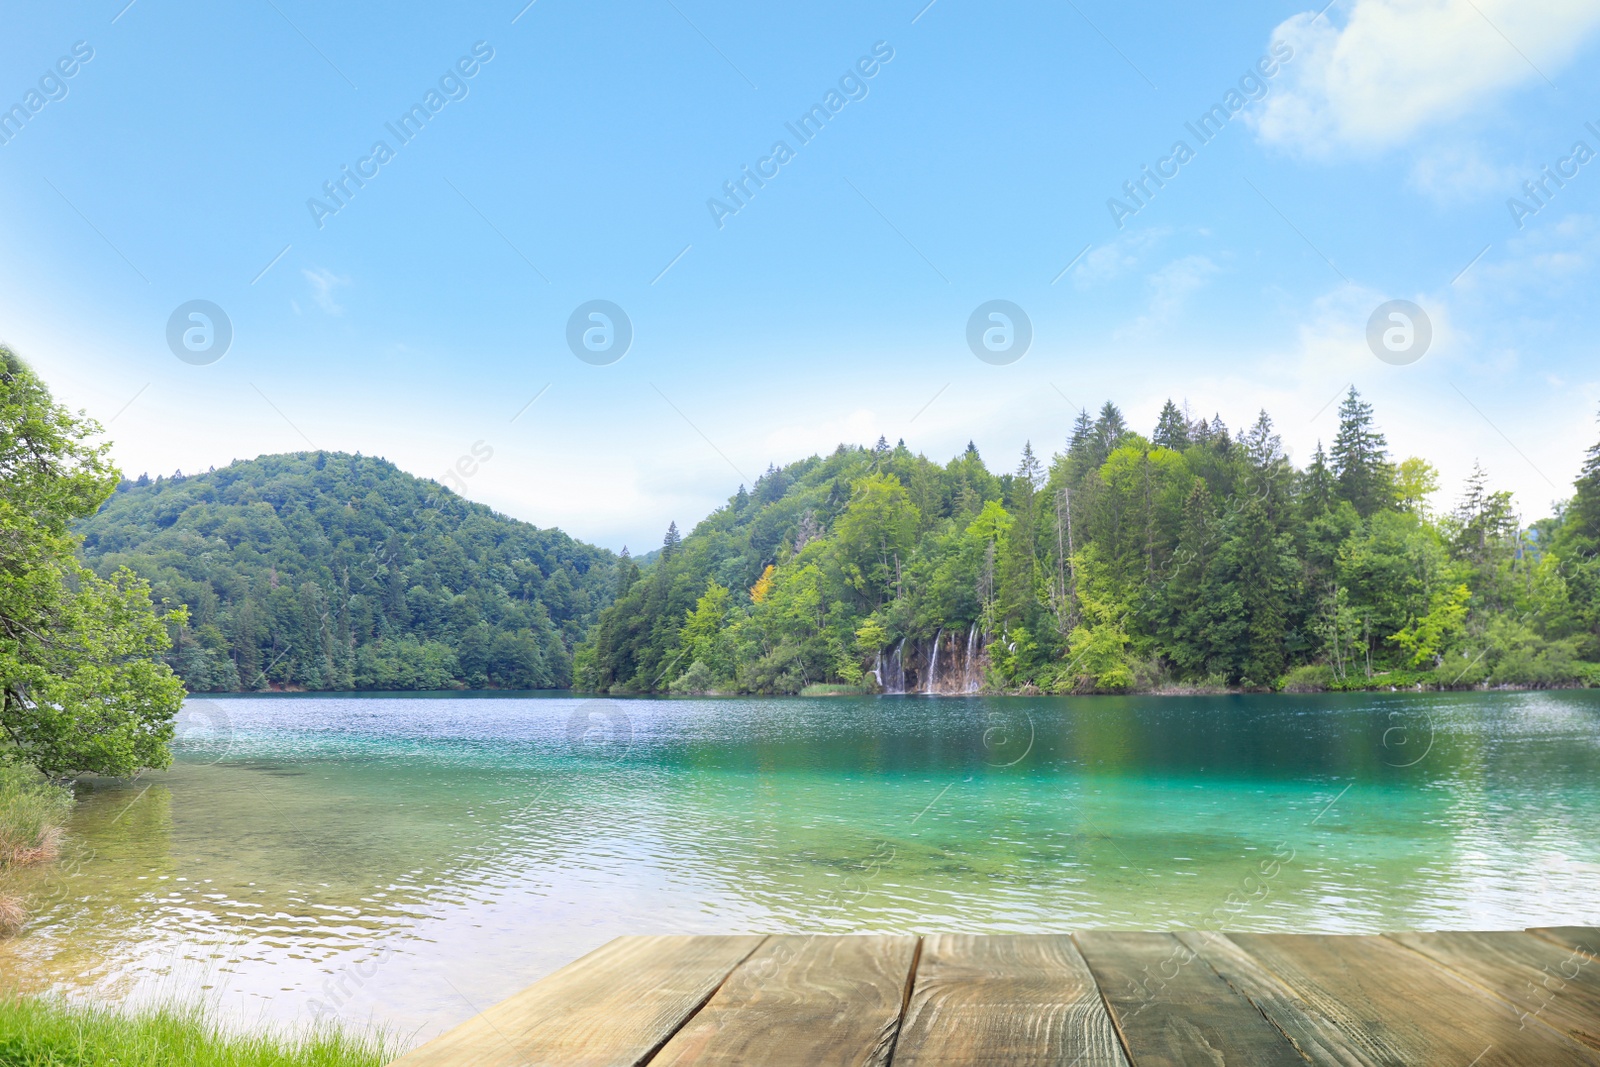 Image of Beautiful view of mountains and wooden pier near river on sunny day